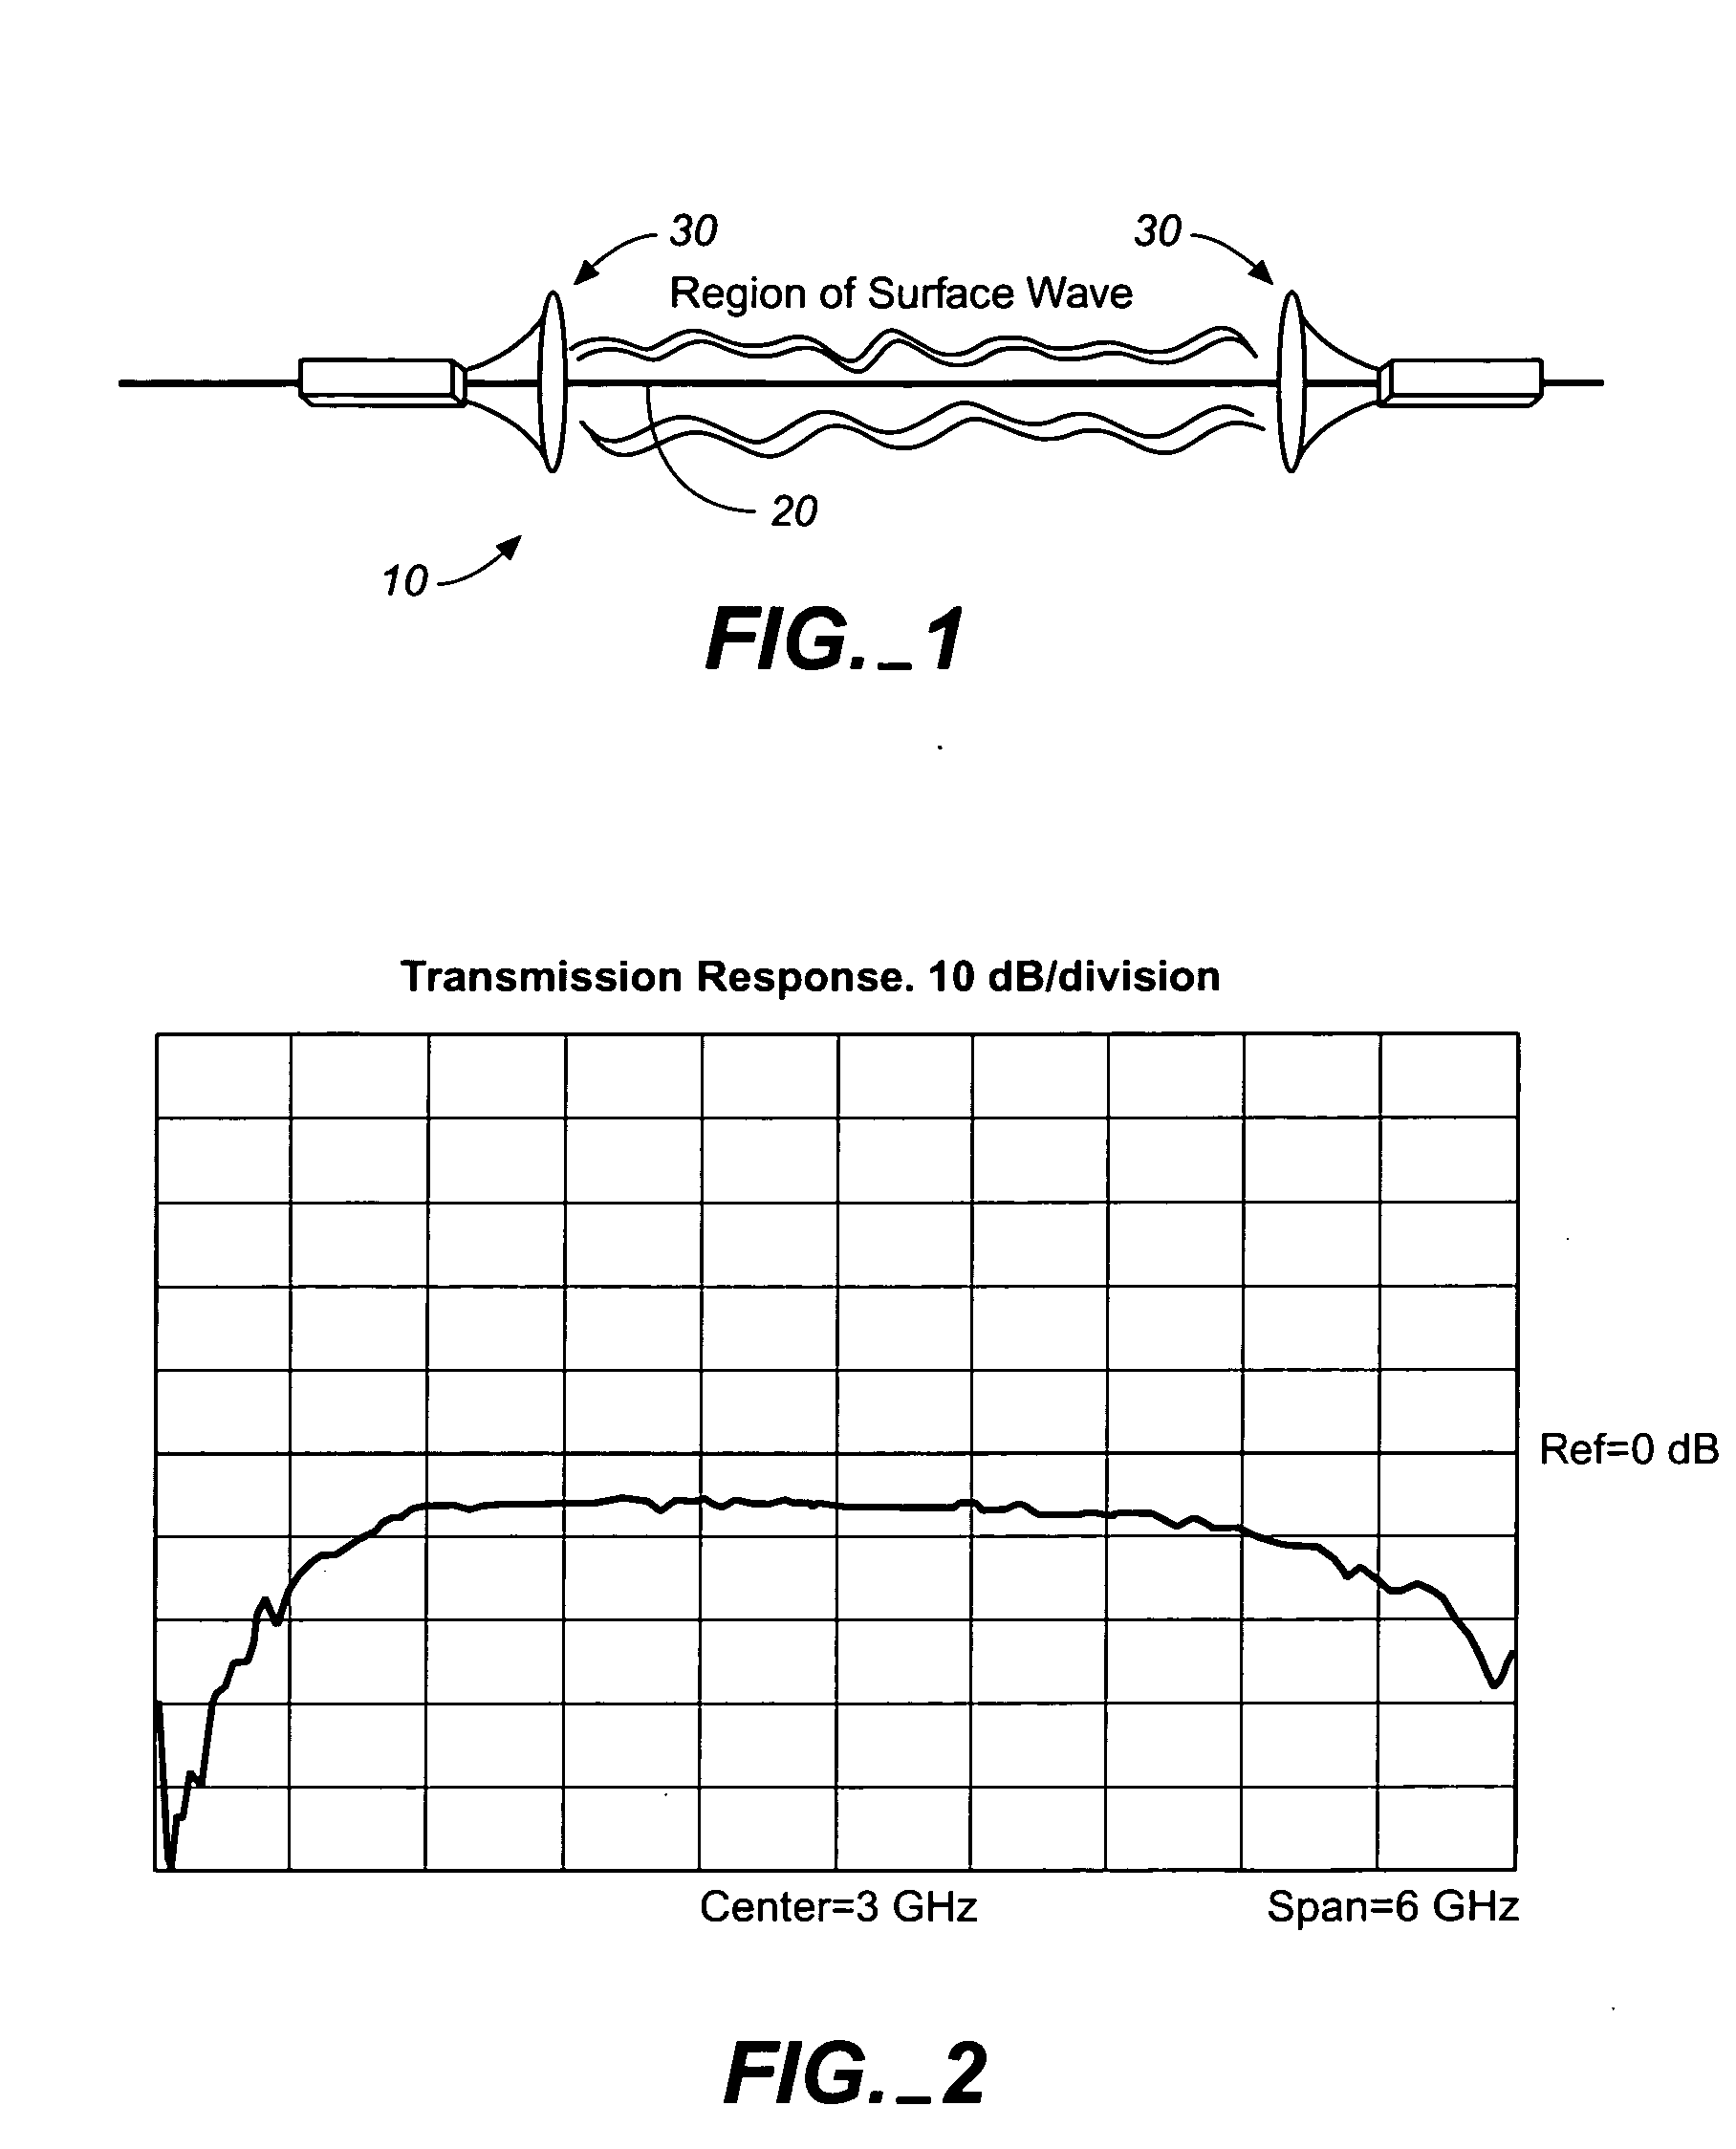 System and method for launching surface waves over unconditioned lines